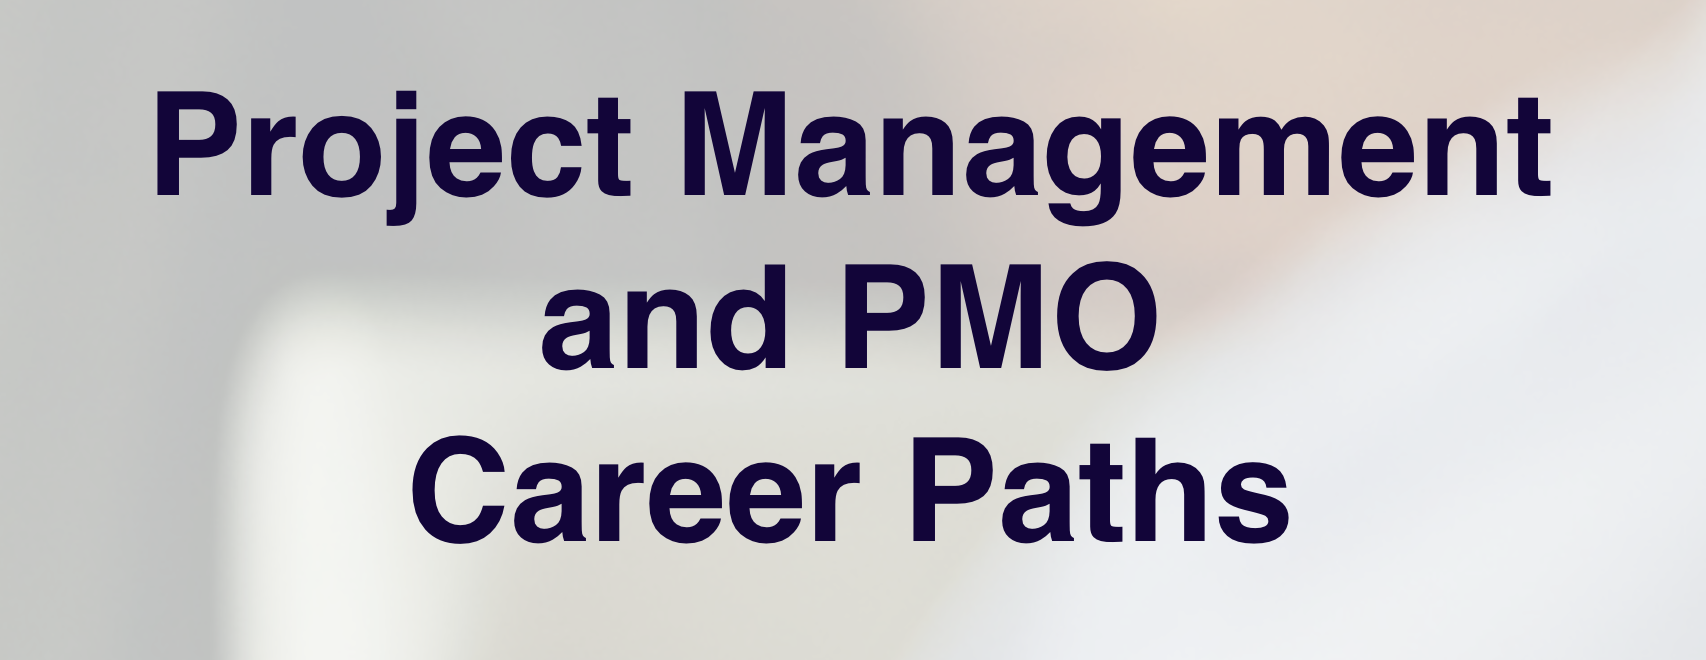 Project Management and PMO Career Paths